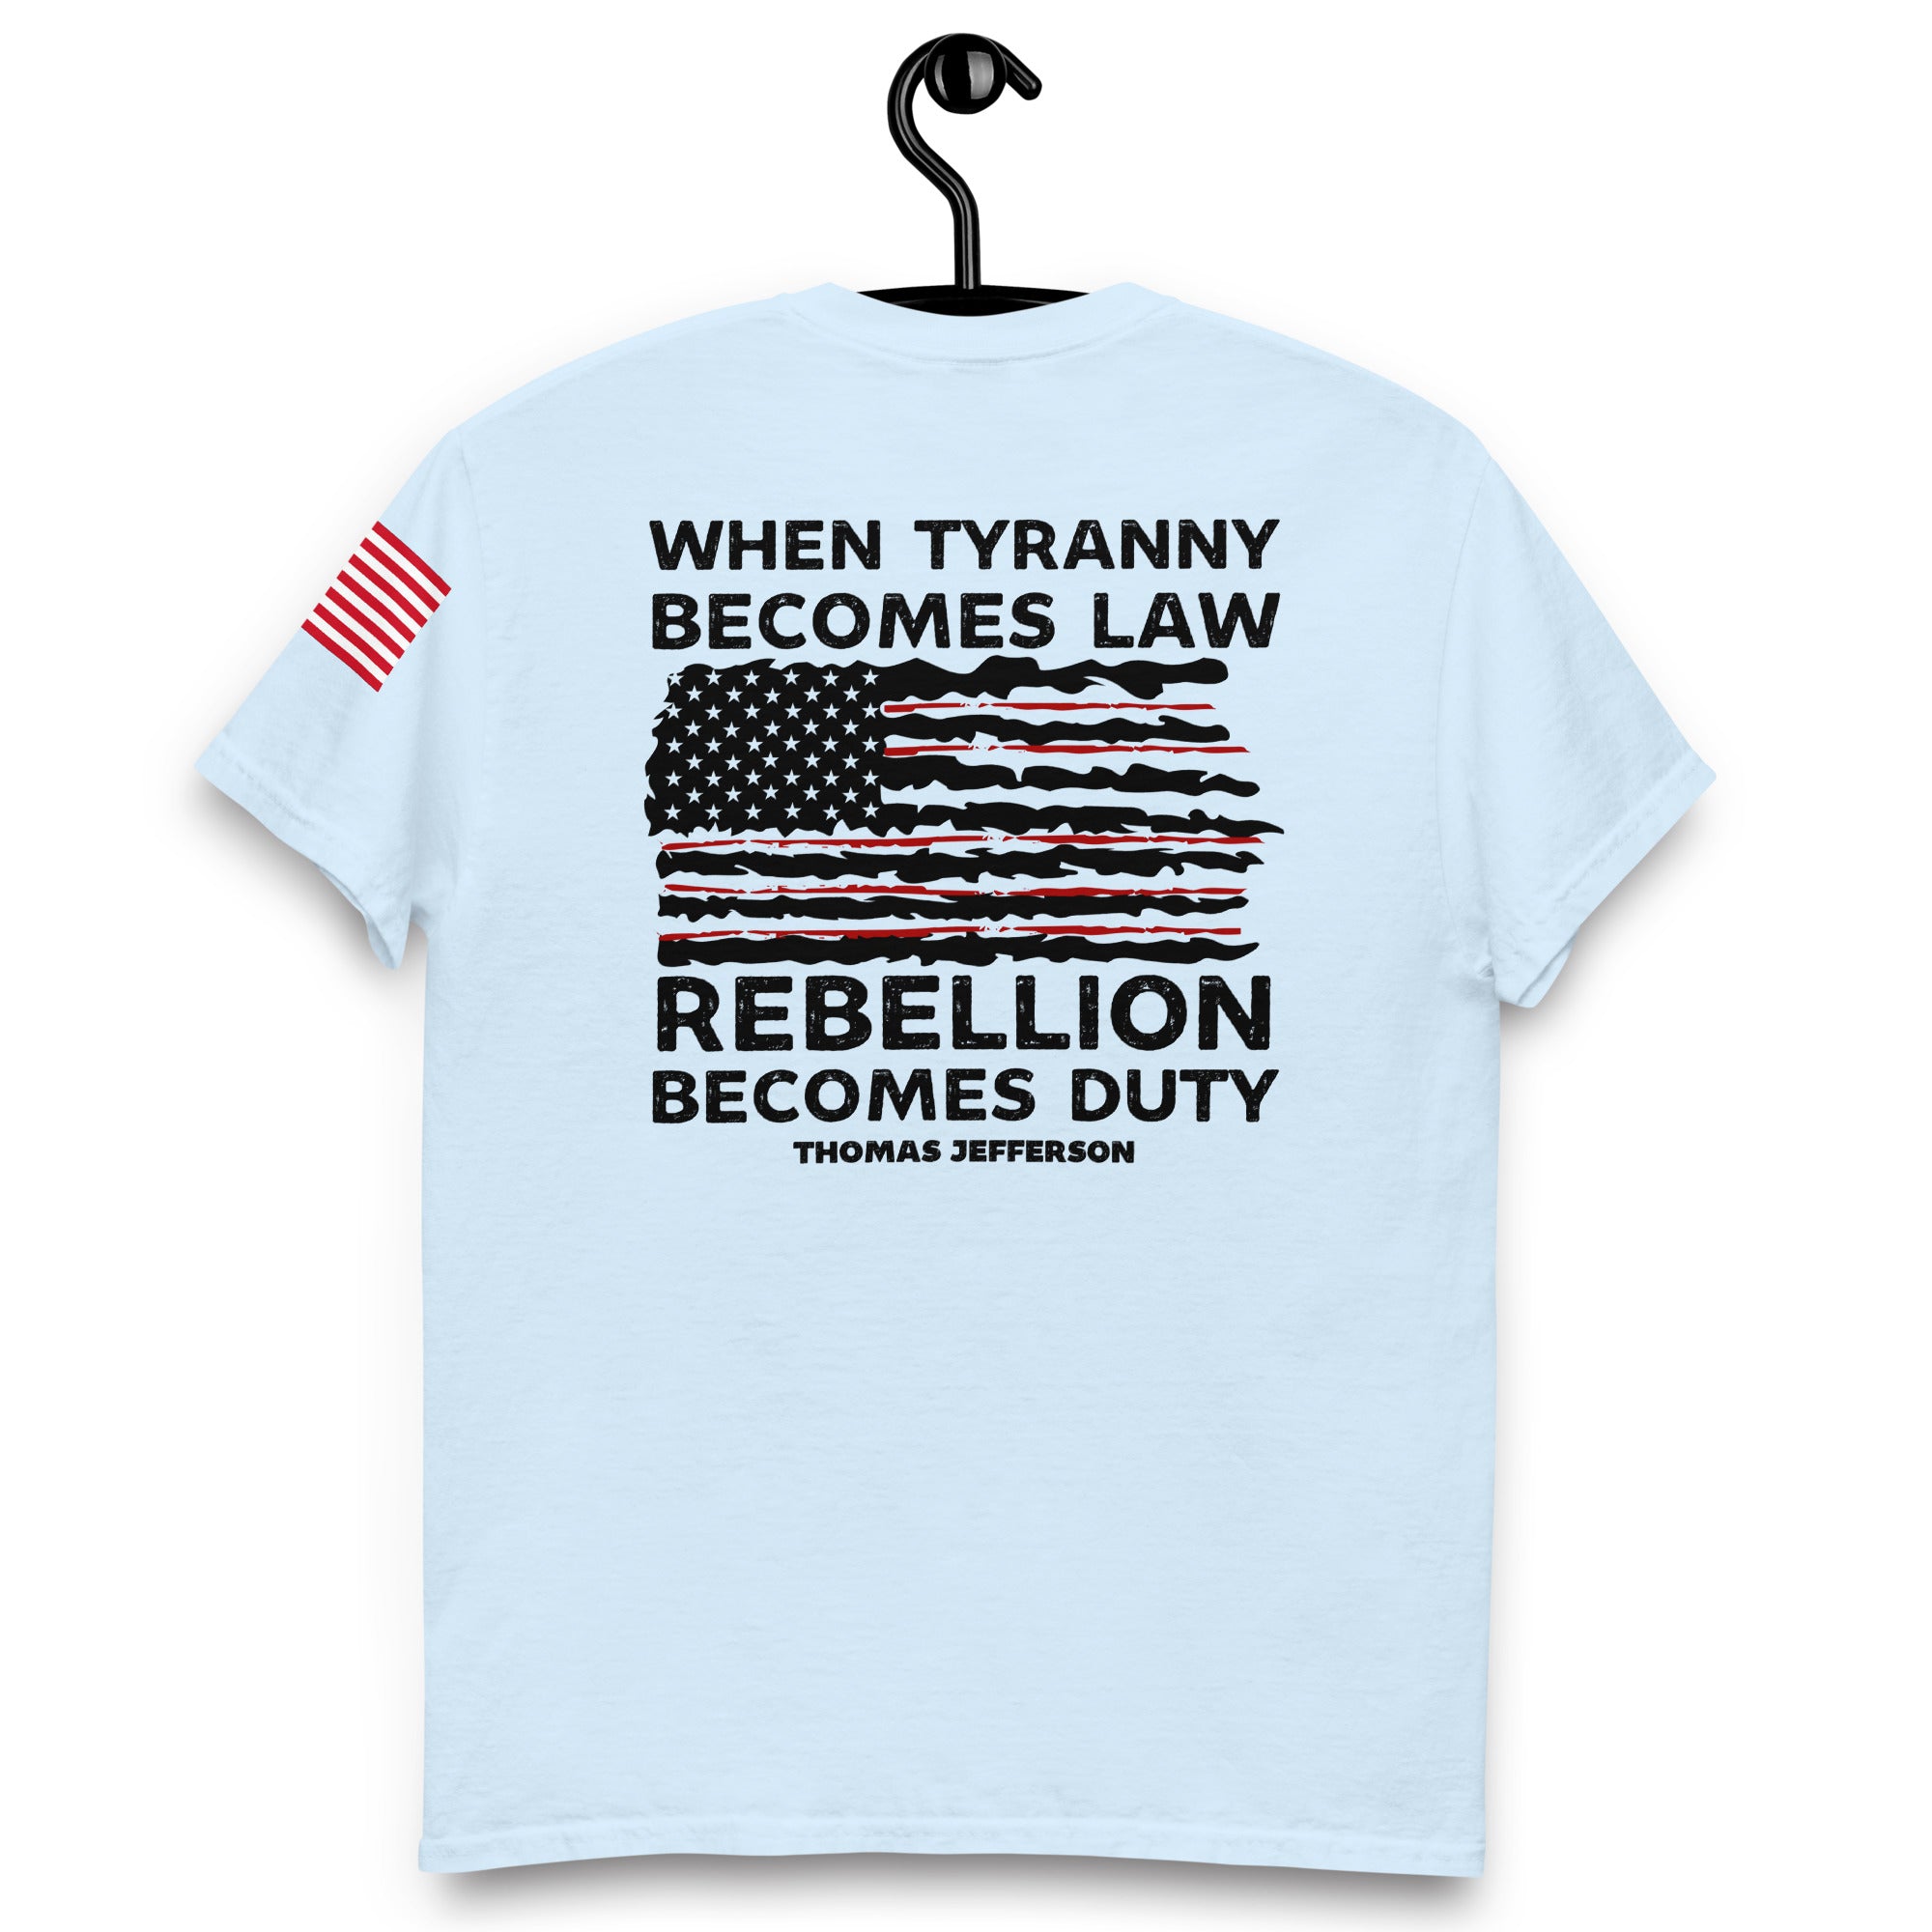 When Tyranny Becomes Law Rebellion Becomes Duty, American Patriot Shirt, Thomas Jefferson Tee, Political Shirts, 4th of July Patriotic Shirt